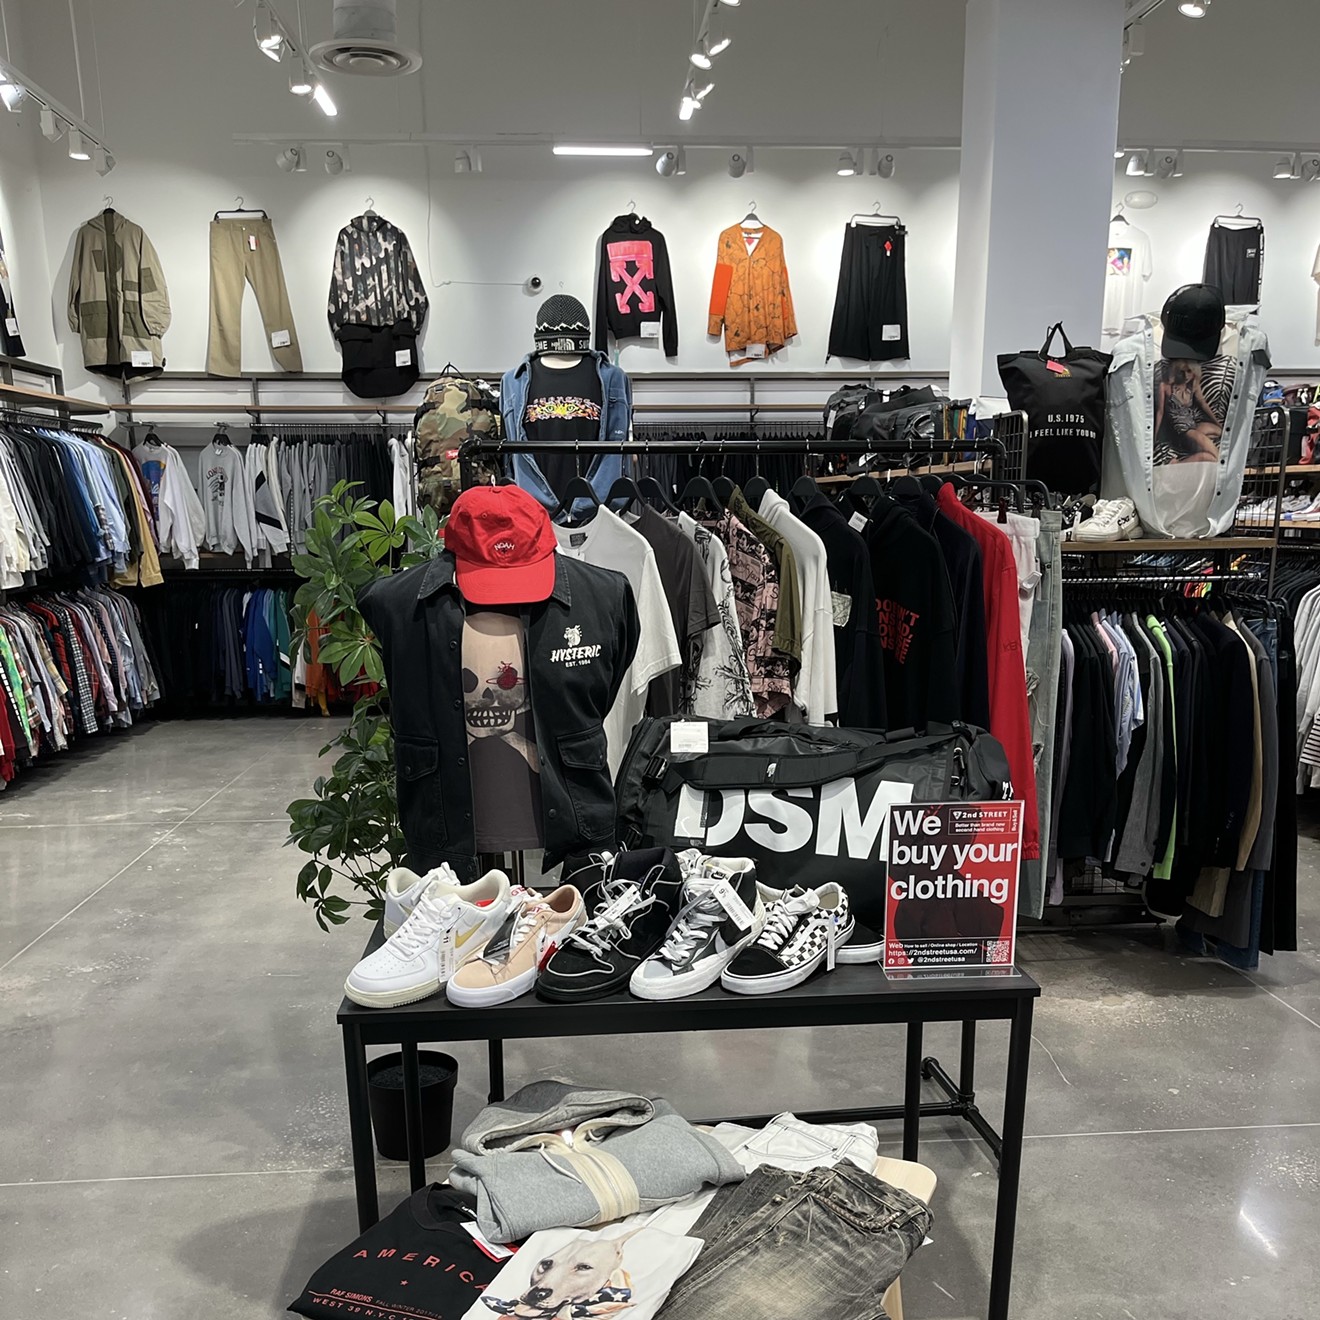 Resale retailer 2nd Street USA, from Japan, is now in Texas.